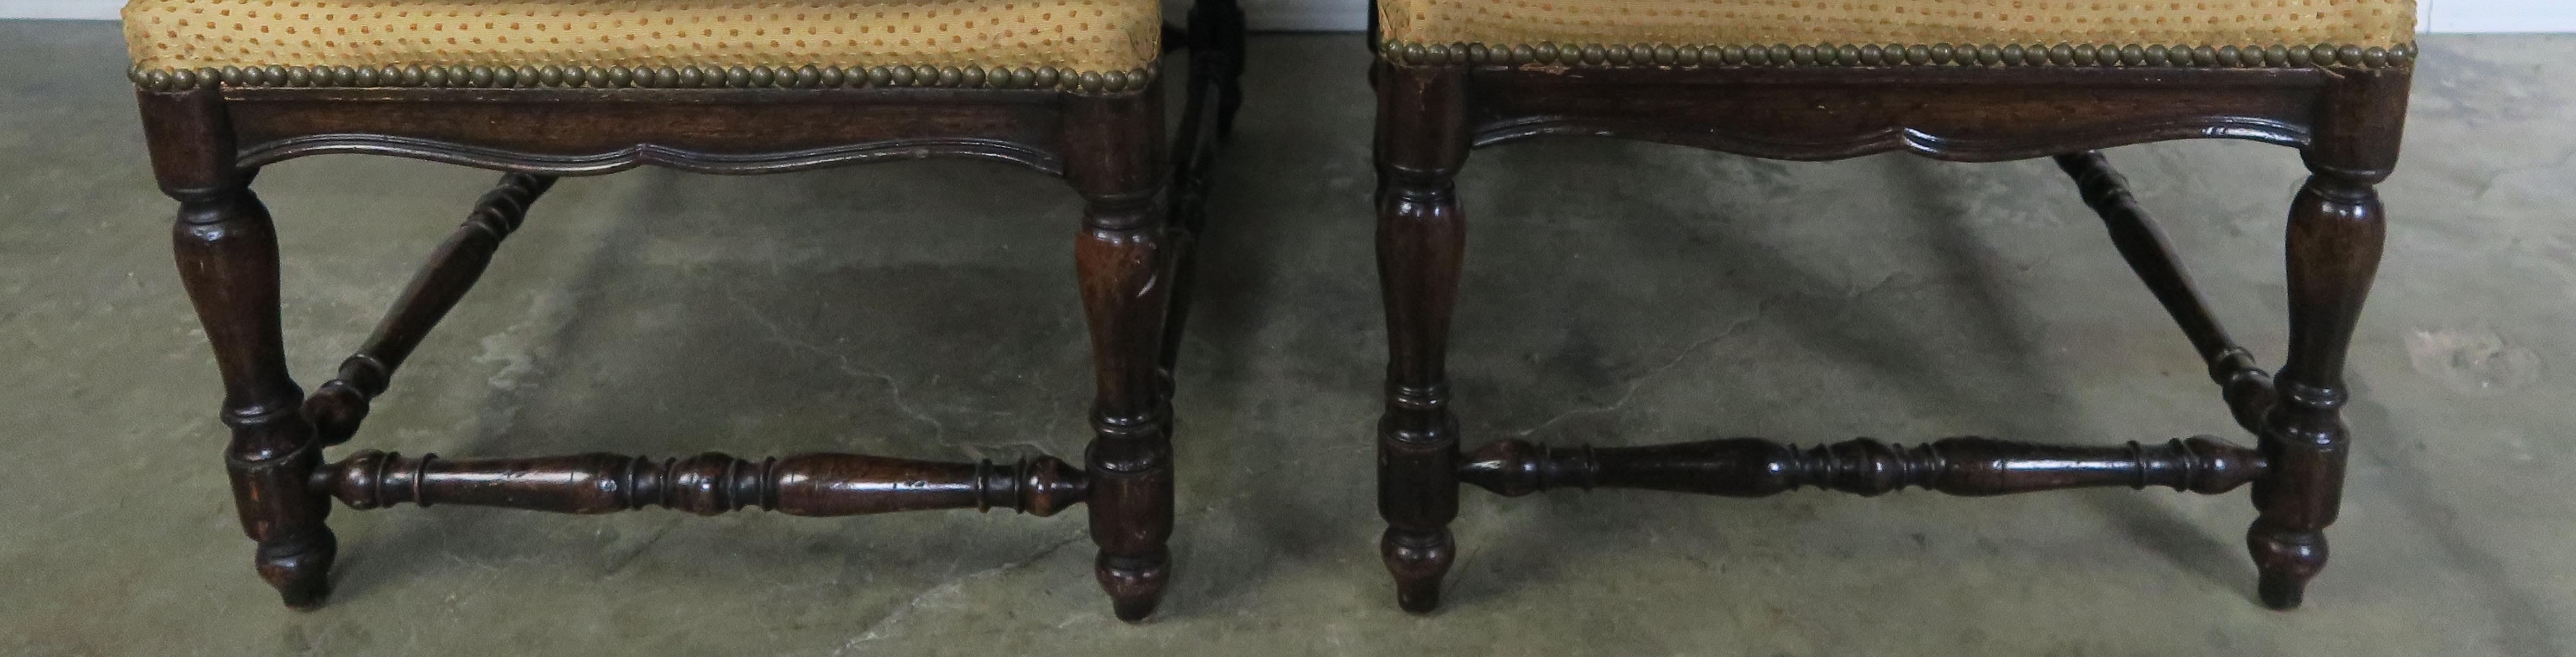 Carved French Louis XV Style Walnut Benches with Loose Cushions circa 1900s, Pair